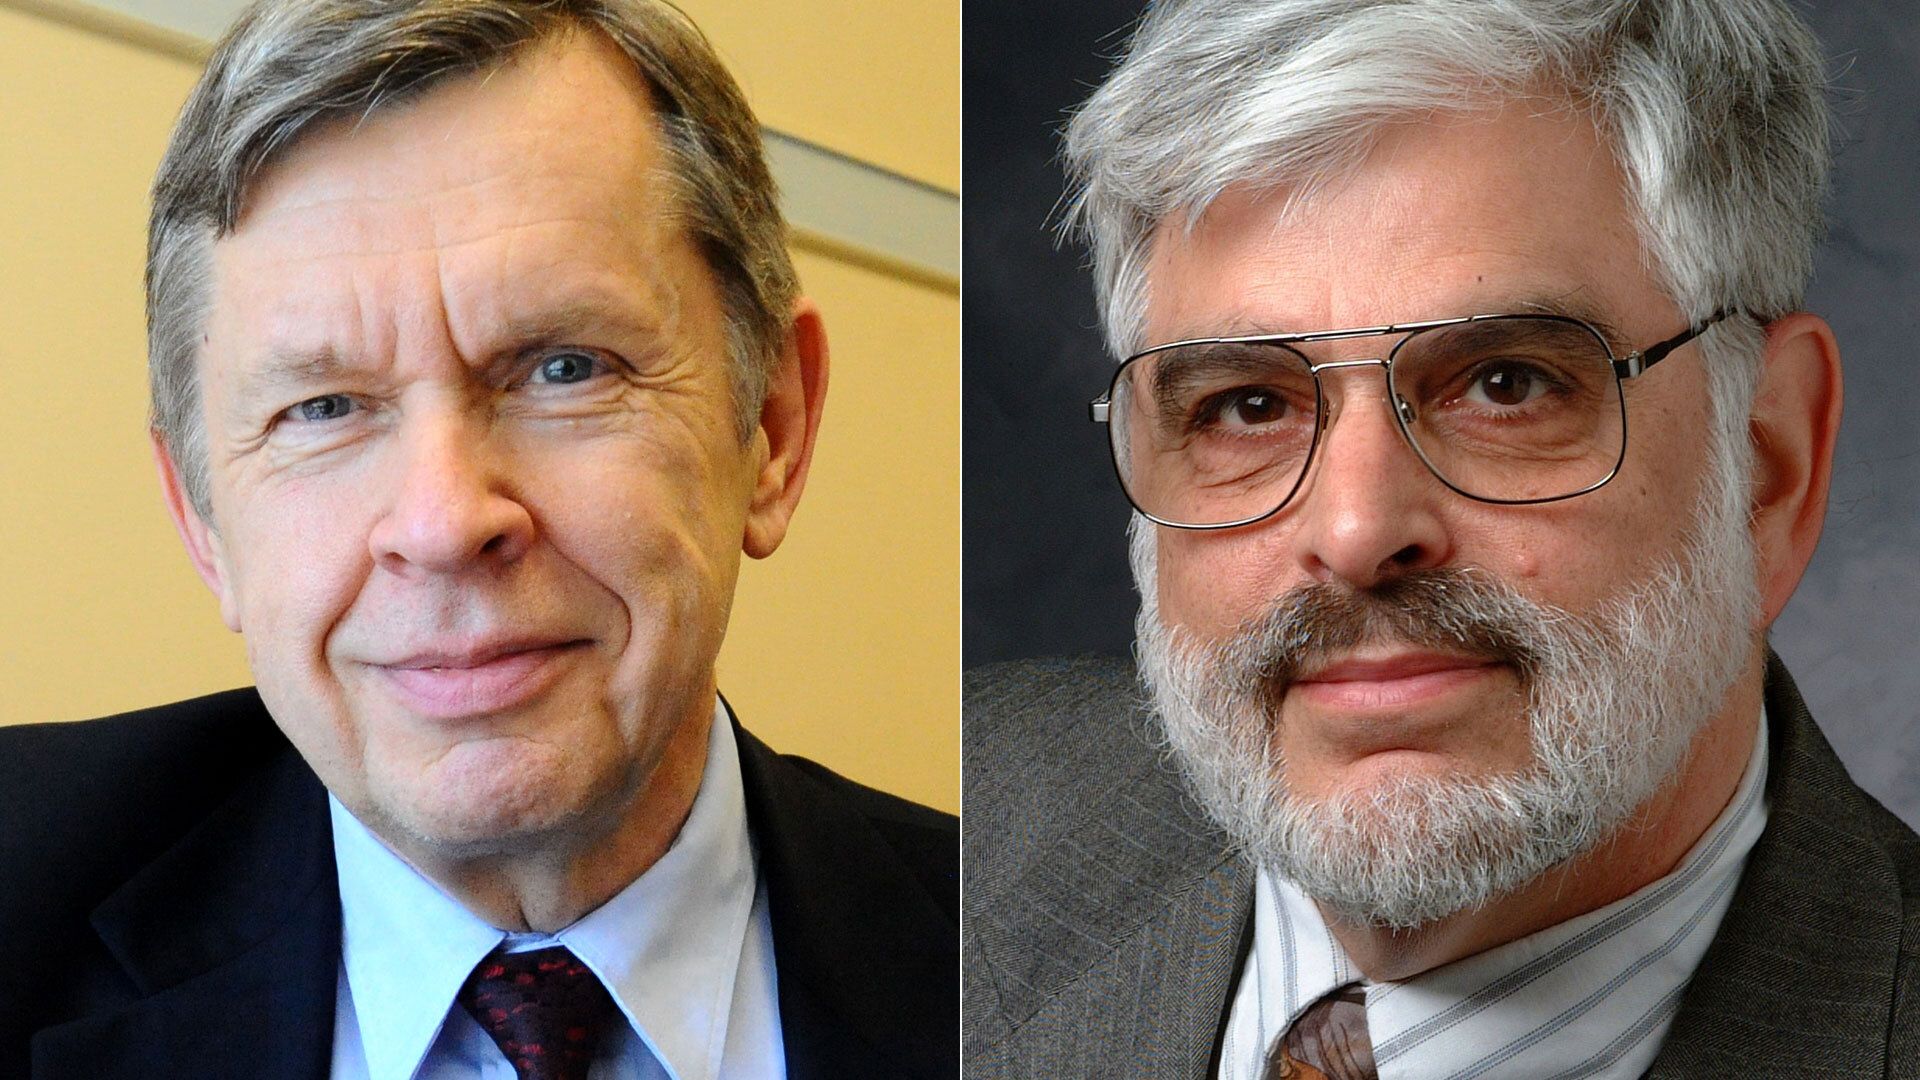 Turing award winners Alfred Aho (left) and Jeffrey Ullman (right)